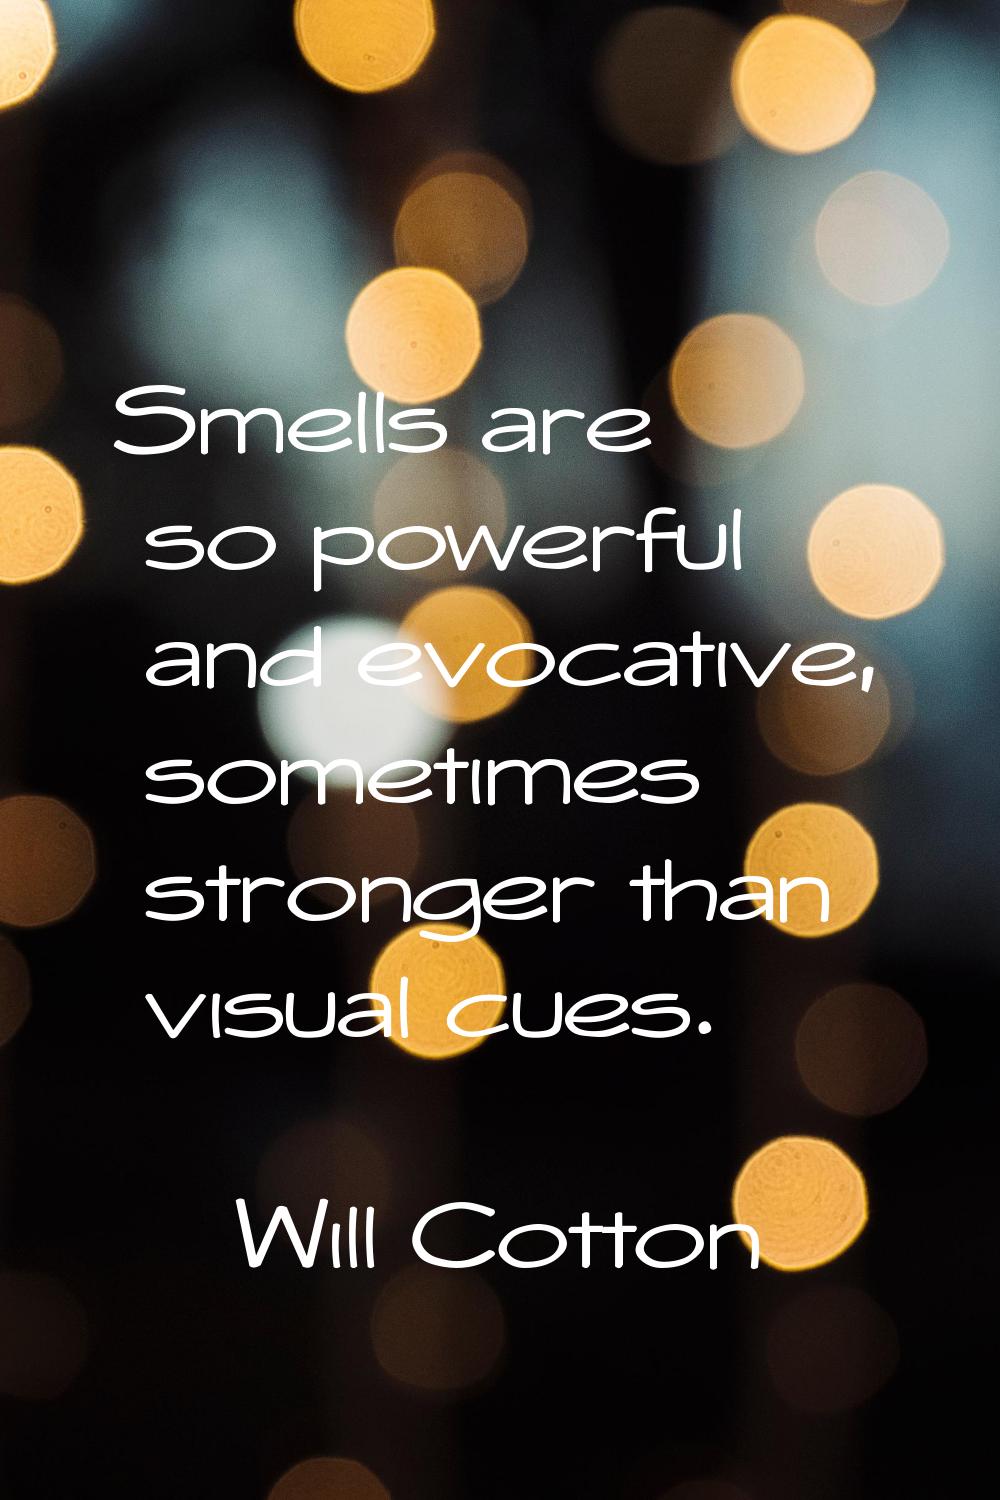 Smells are so powerful and evocative, sometimes stronger than visual cues.